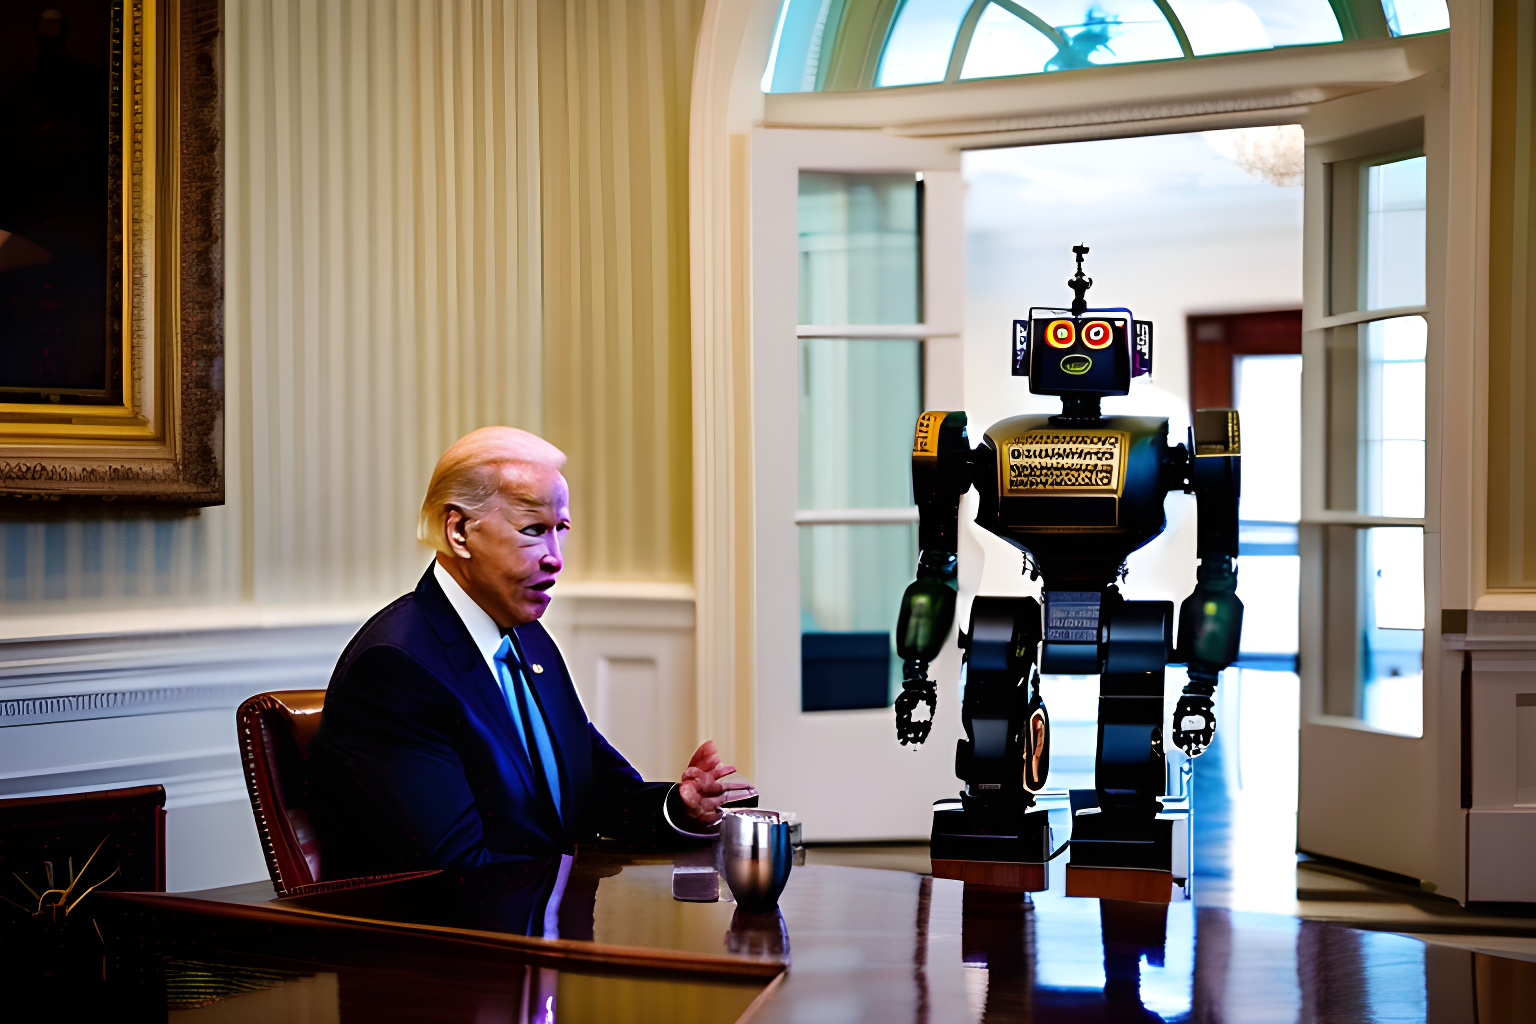 a robot in the whitehouse, joe biden in the background